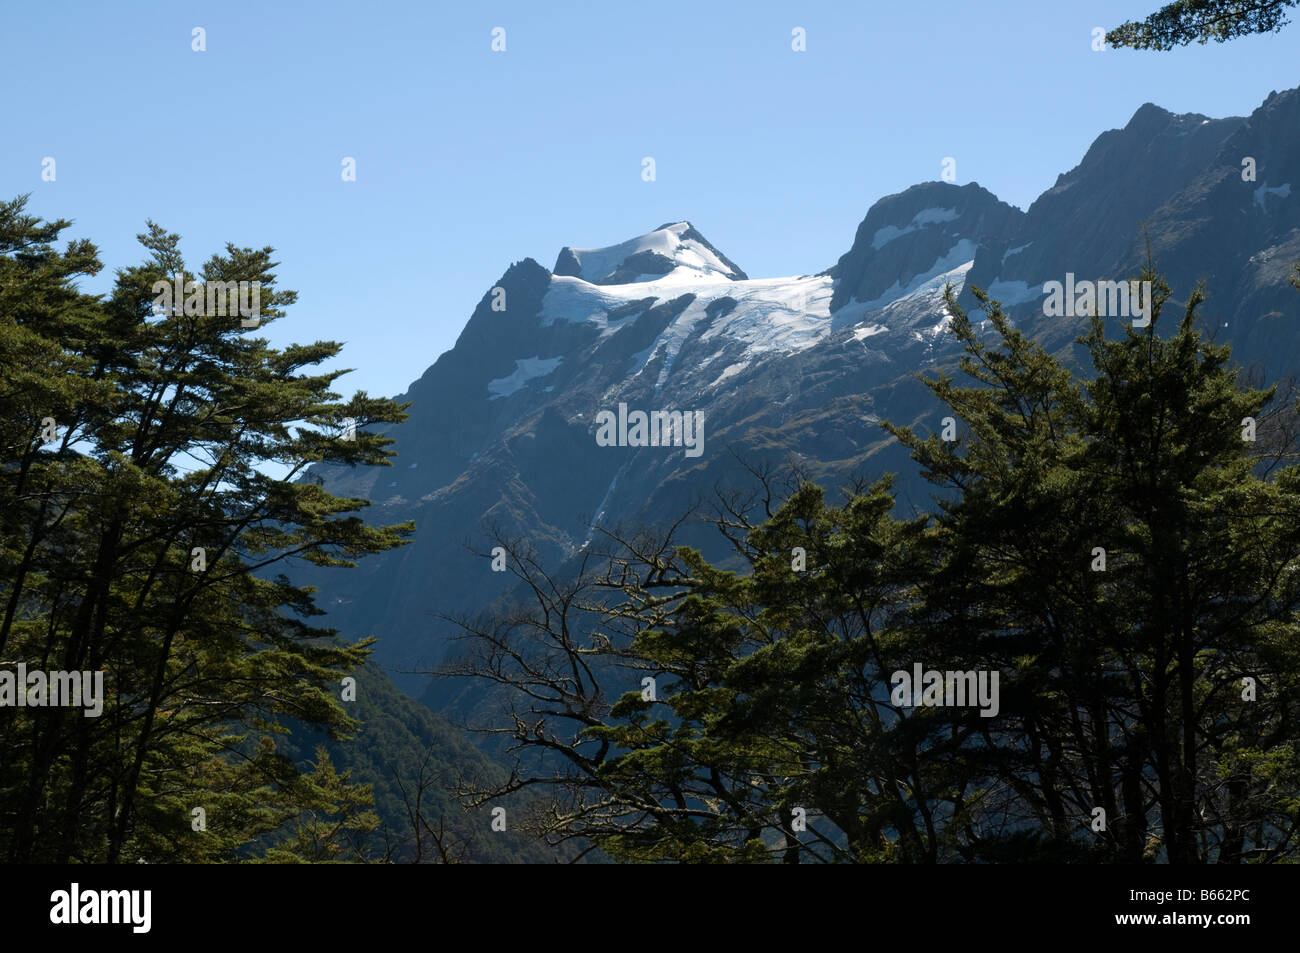 The Humboldt Mountains from the Routeburn track, Mount Aspiring National Park, South Island, New Zealand Stock Photo